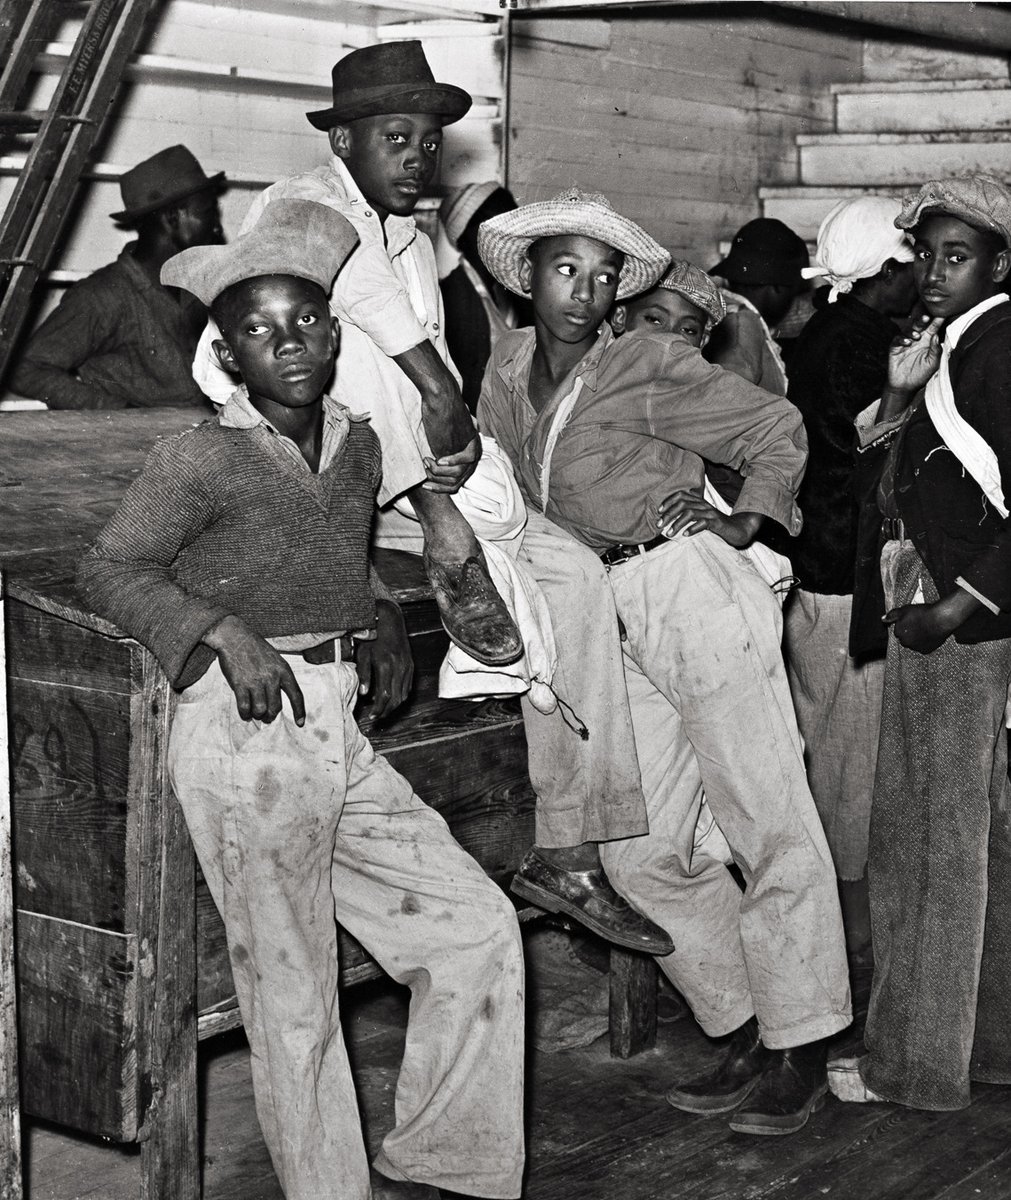 📸 Marion Post Wolcott. Young boys waiting in plantation store to be paid for picking cotton, Clarksdale, MS, 1939. #vintage #blackandwhitephoto